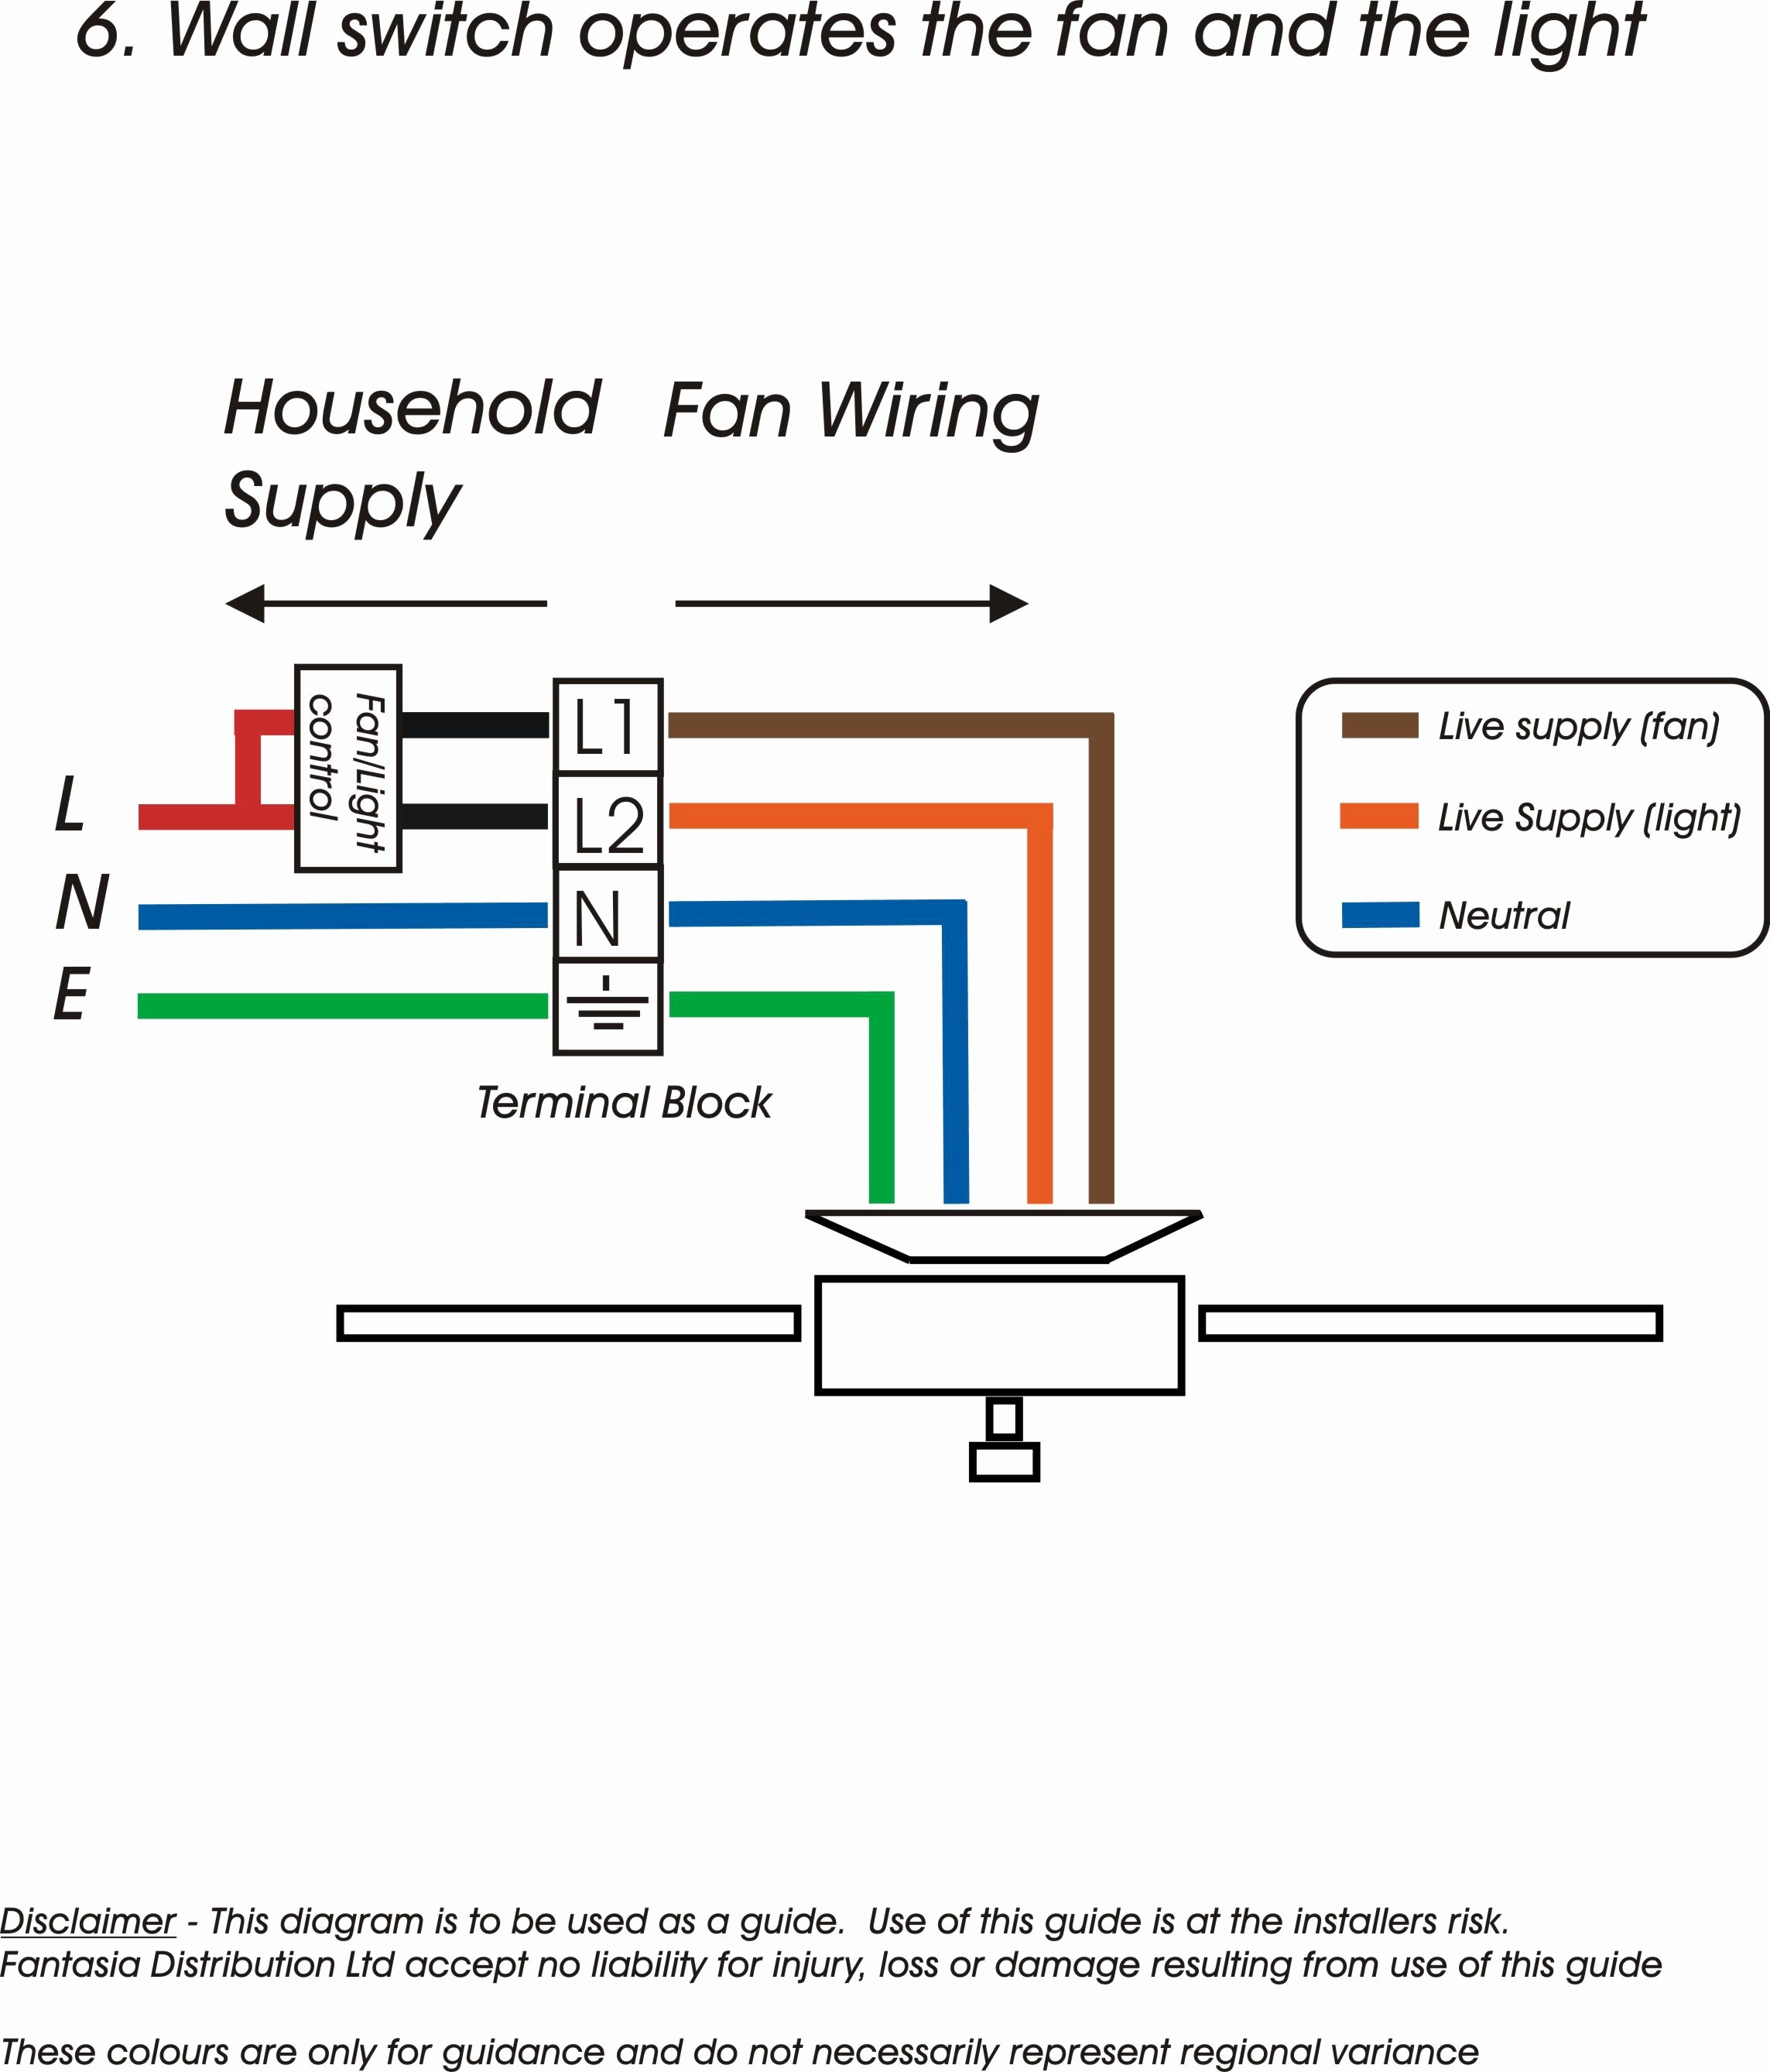 Convert Fluorescent to Led Wiring Diagram Awesome Wiring Diagram for Fluorescent Lights Wiring Diagram